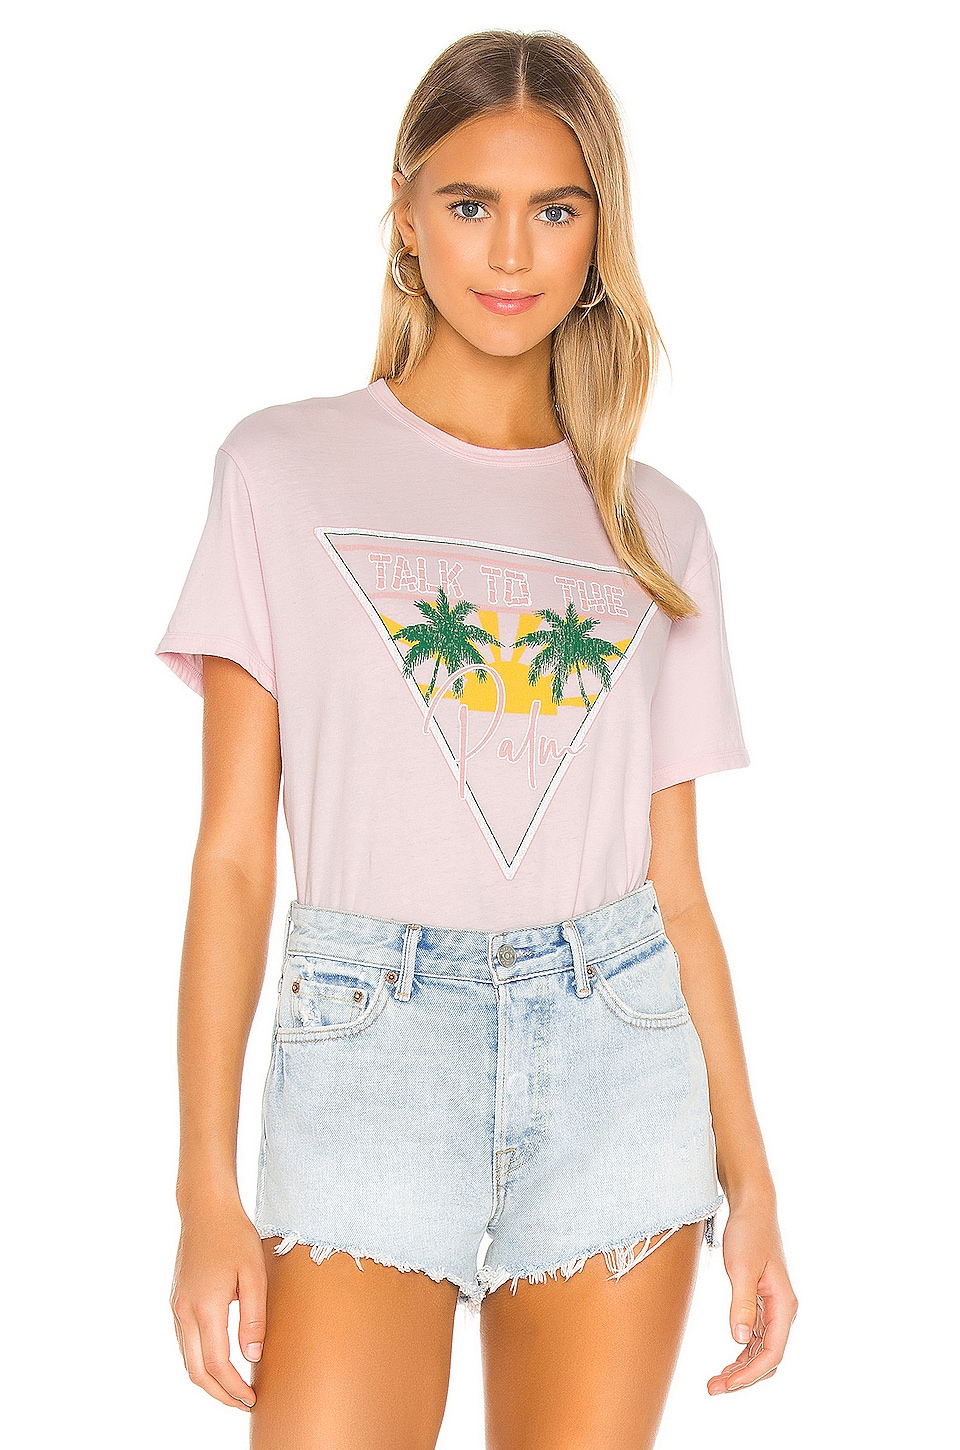 Show Me Your Mumu Sandlot Tee in Talk To The Palm | REVOLVE